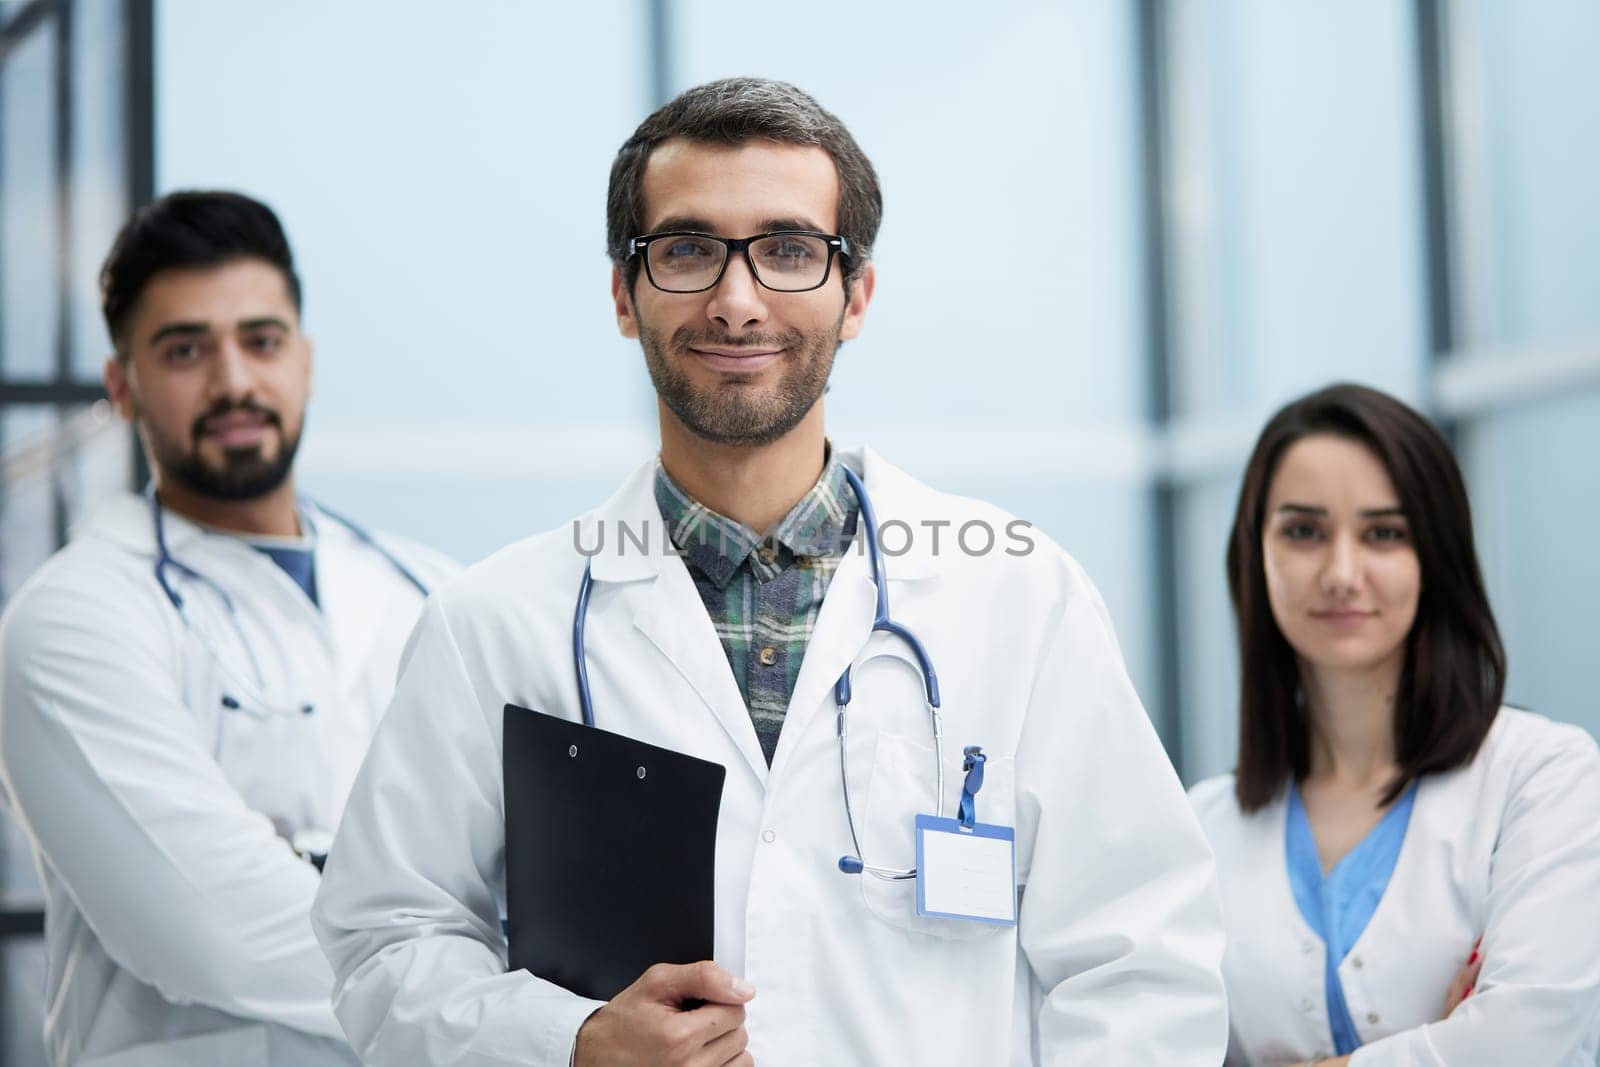 Portrait of three clinicians in uniform looking at camera with smiles